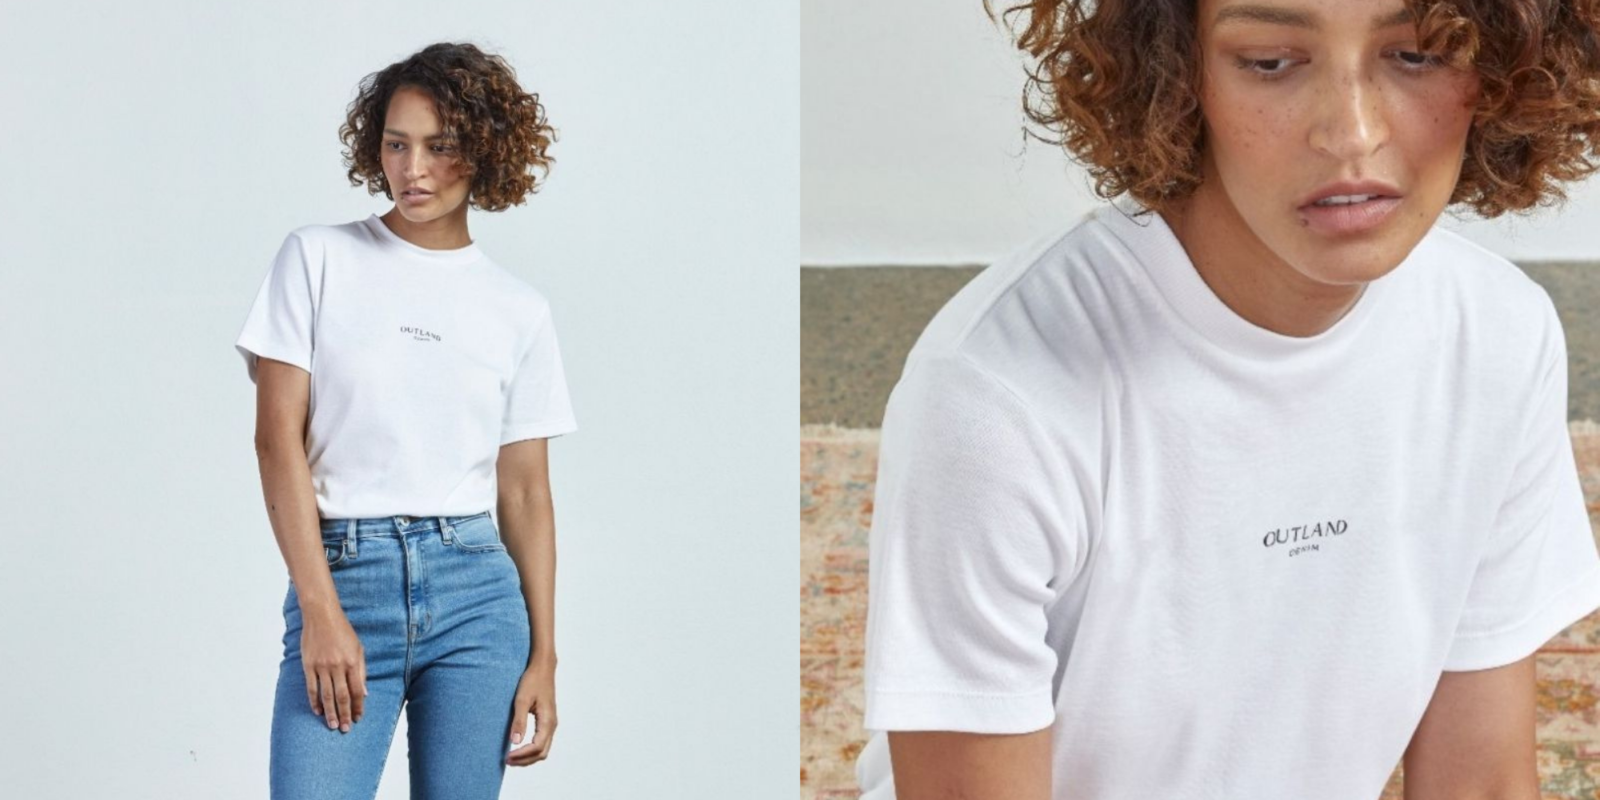 29 Organic T-Shirts to Upgrade Your Essentials - Good On You